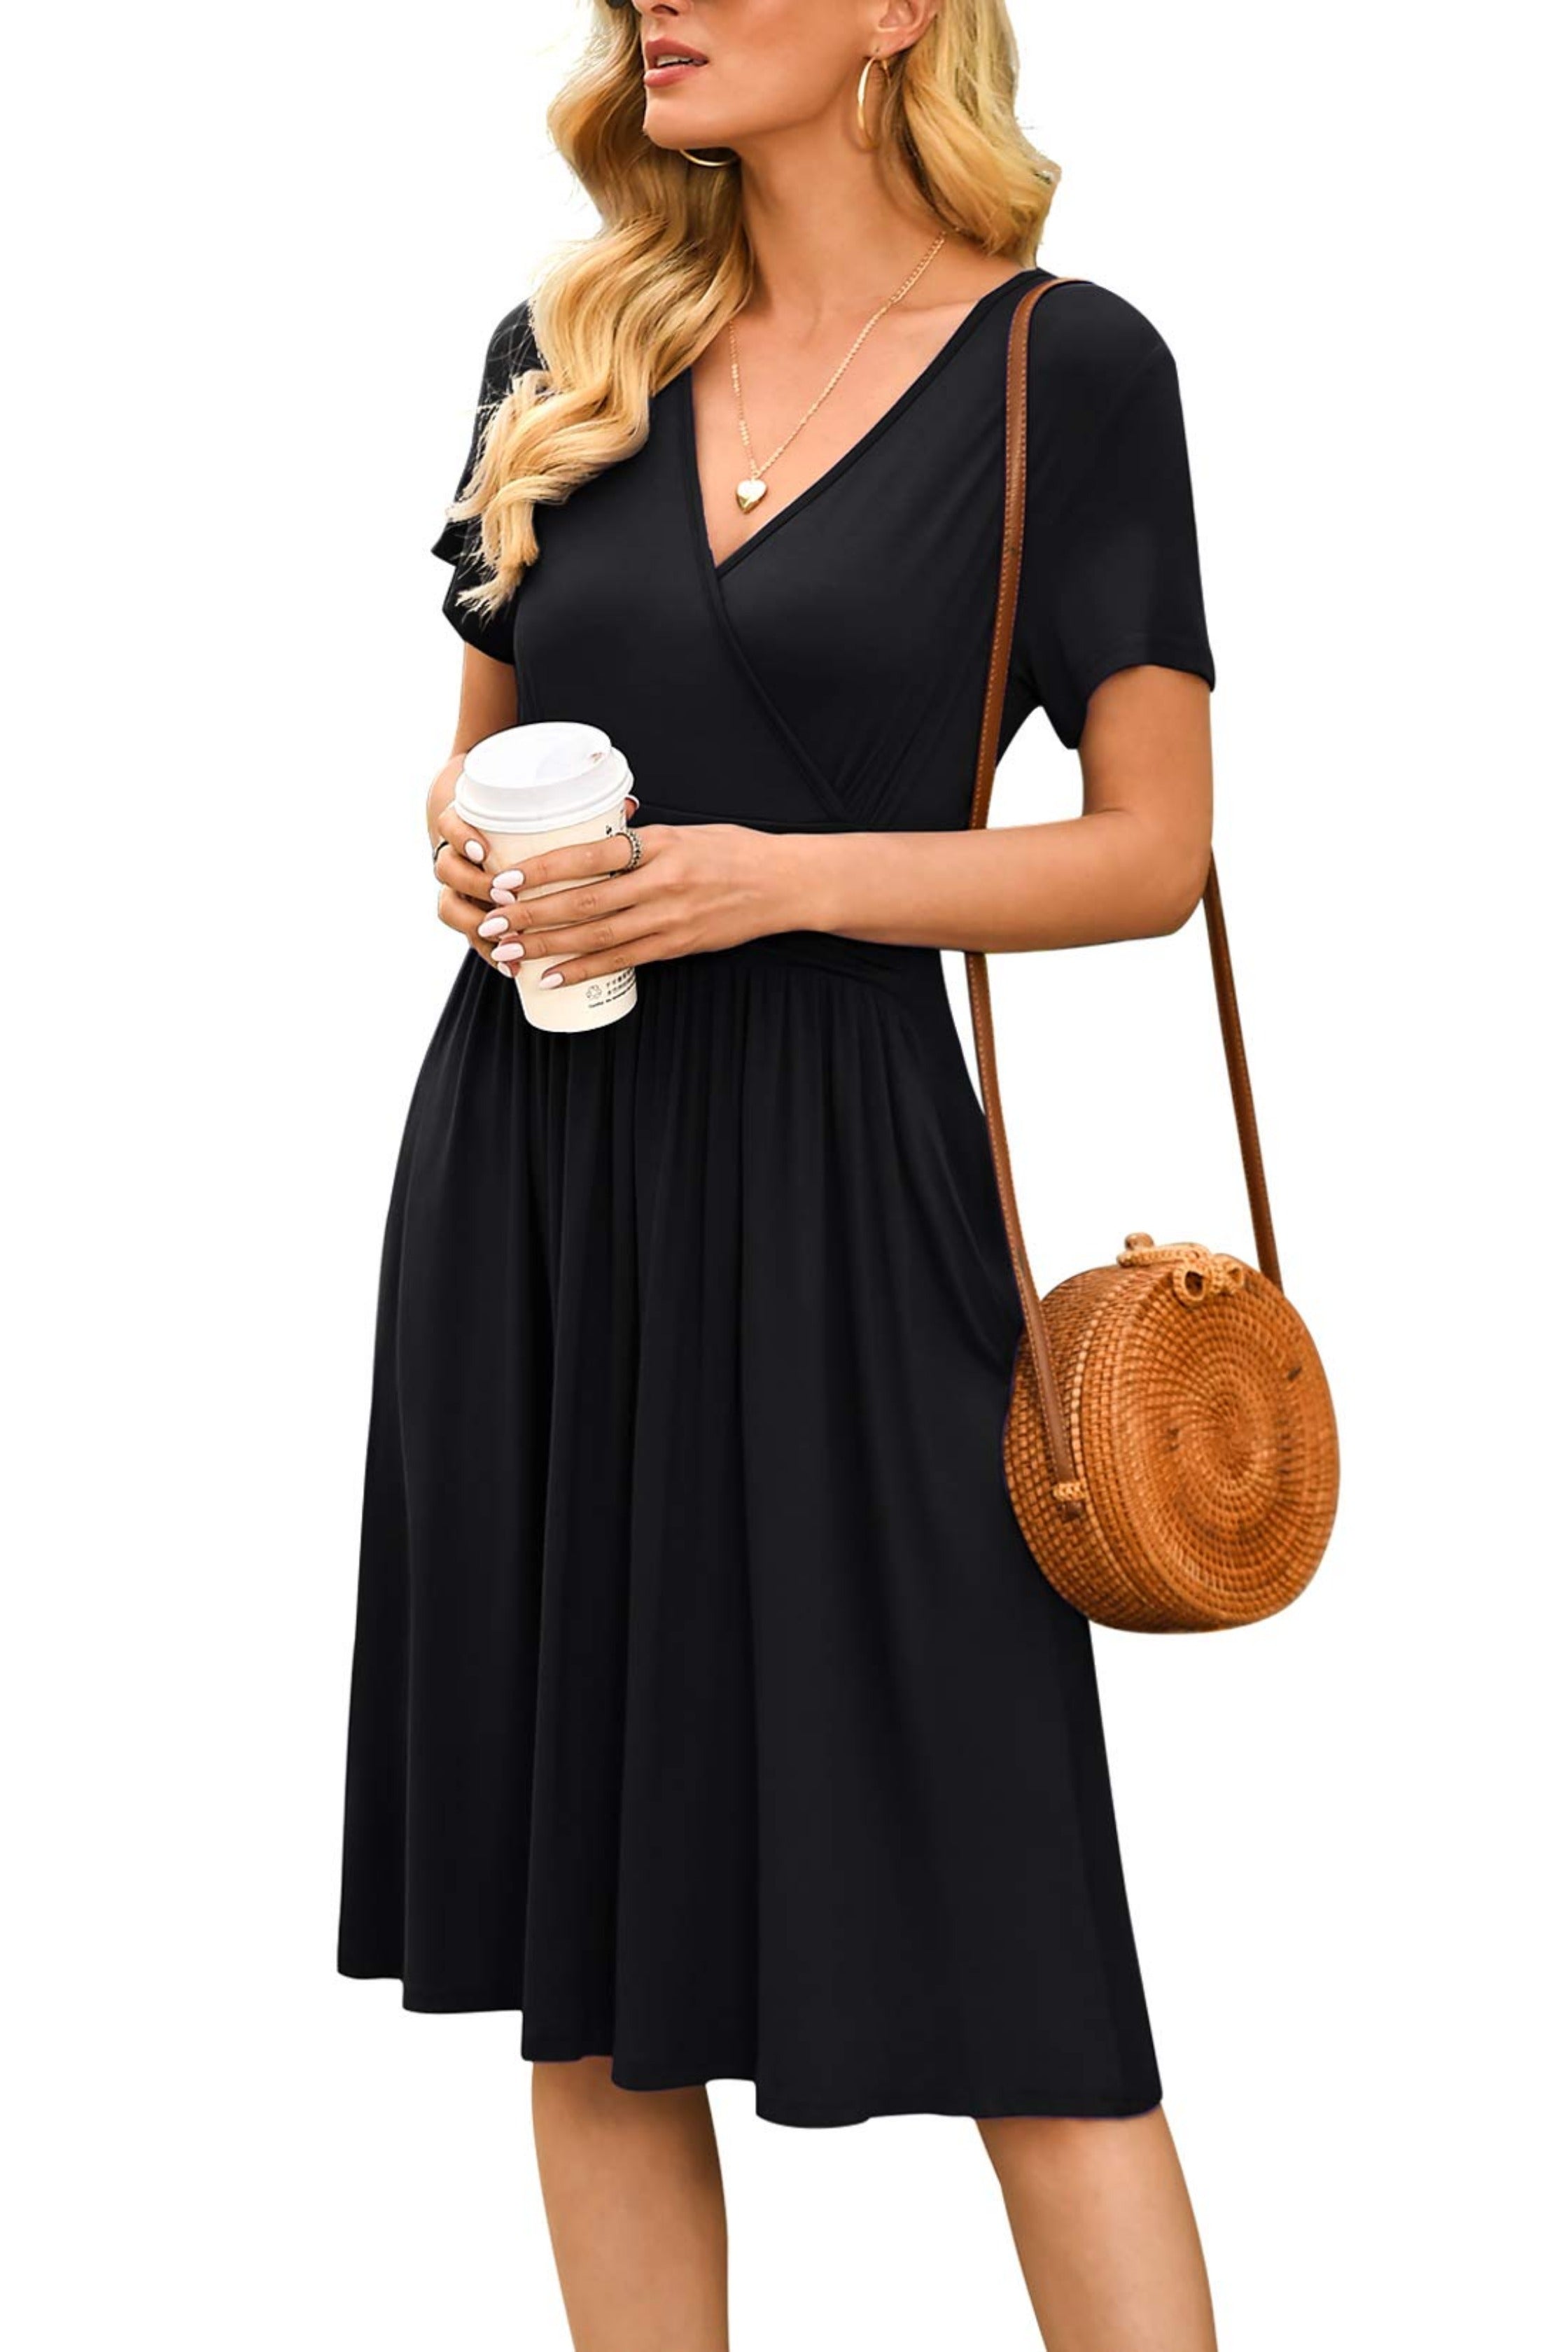 Summer Casual Midi Dress with Pockets, Short Party Dress